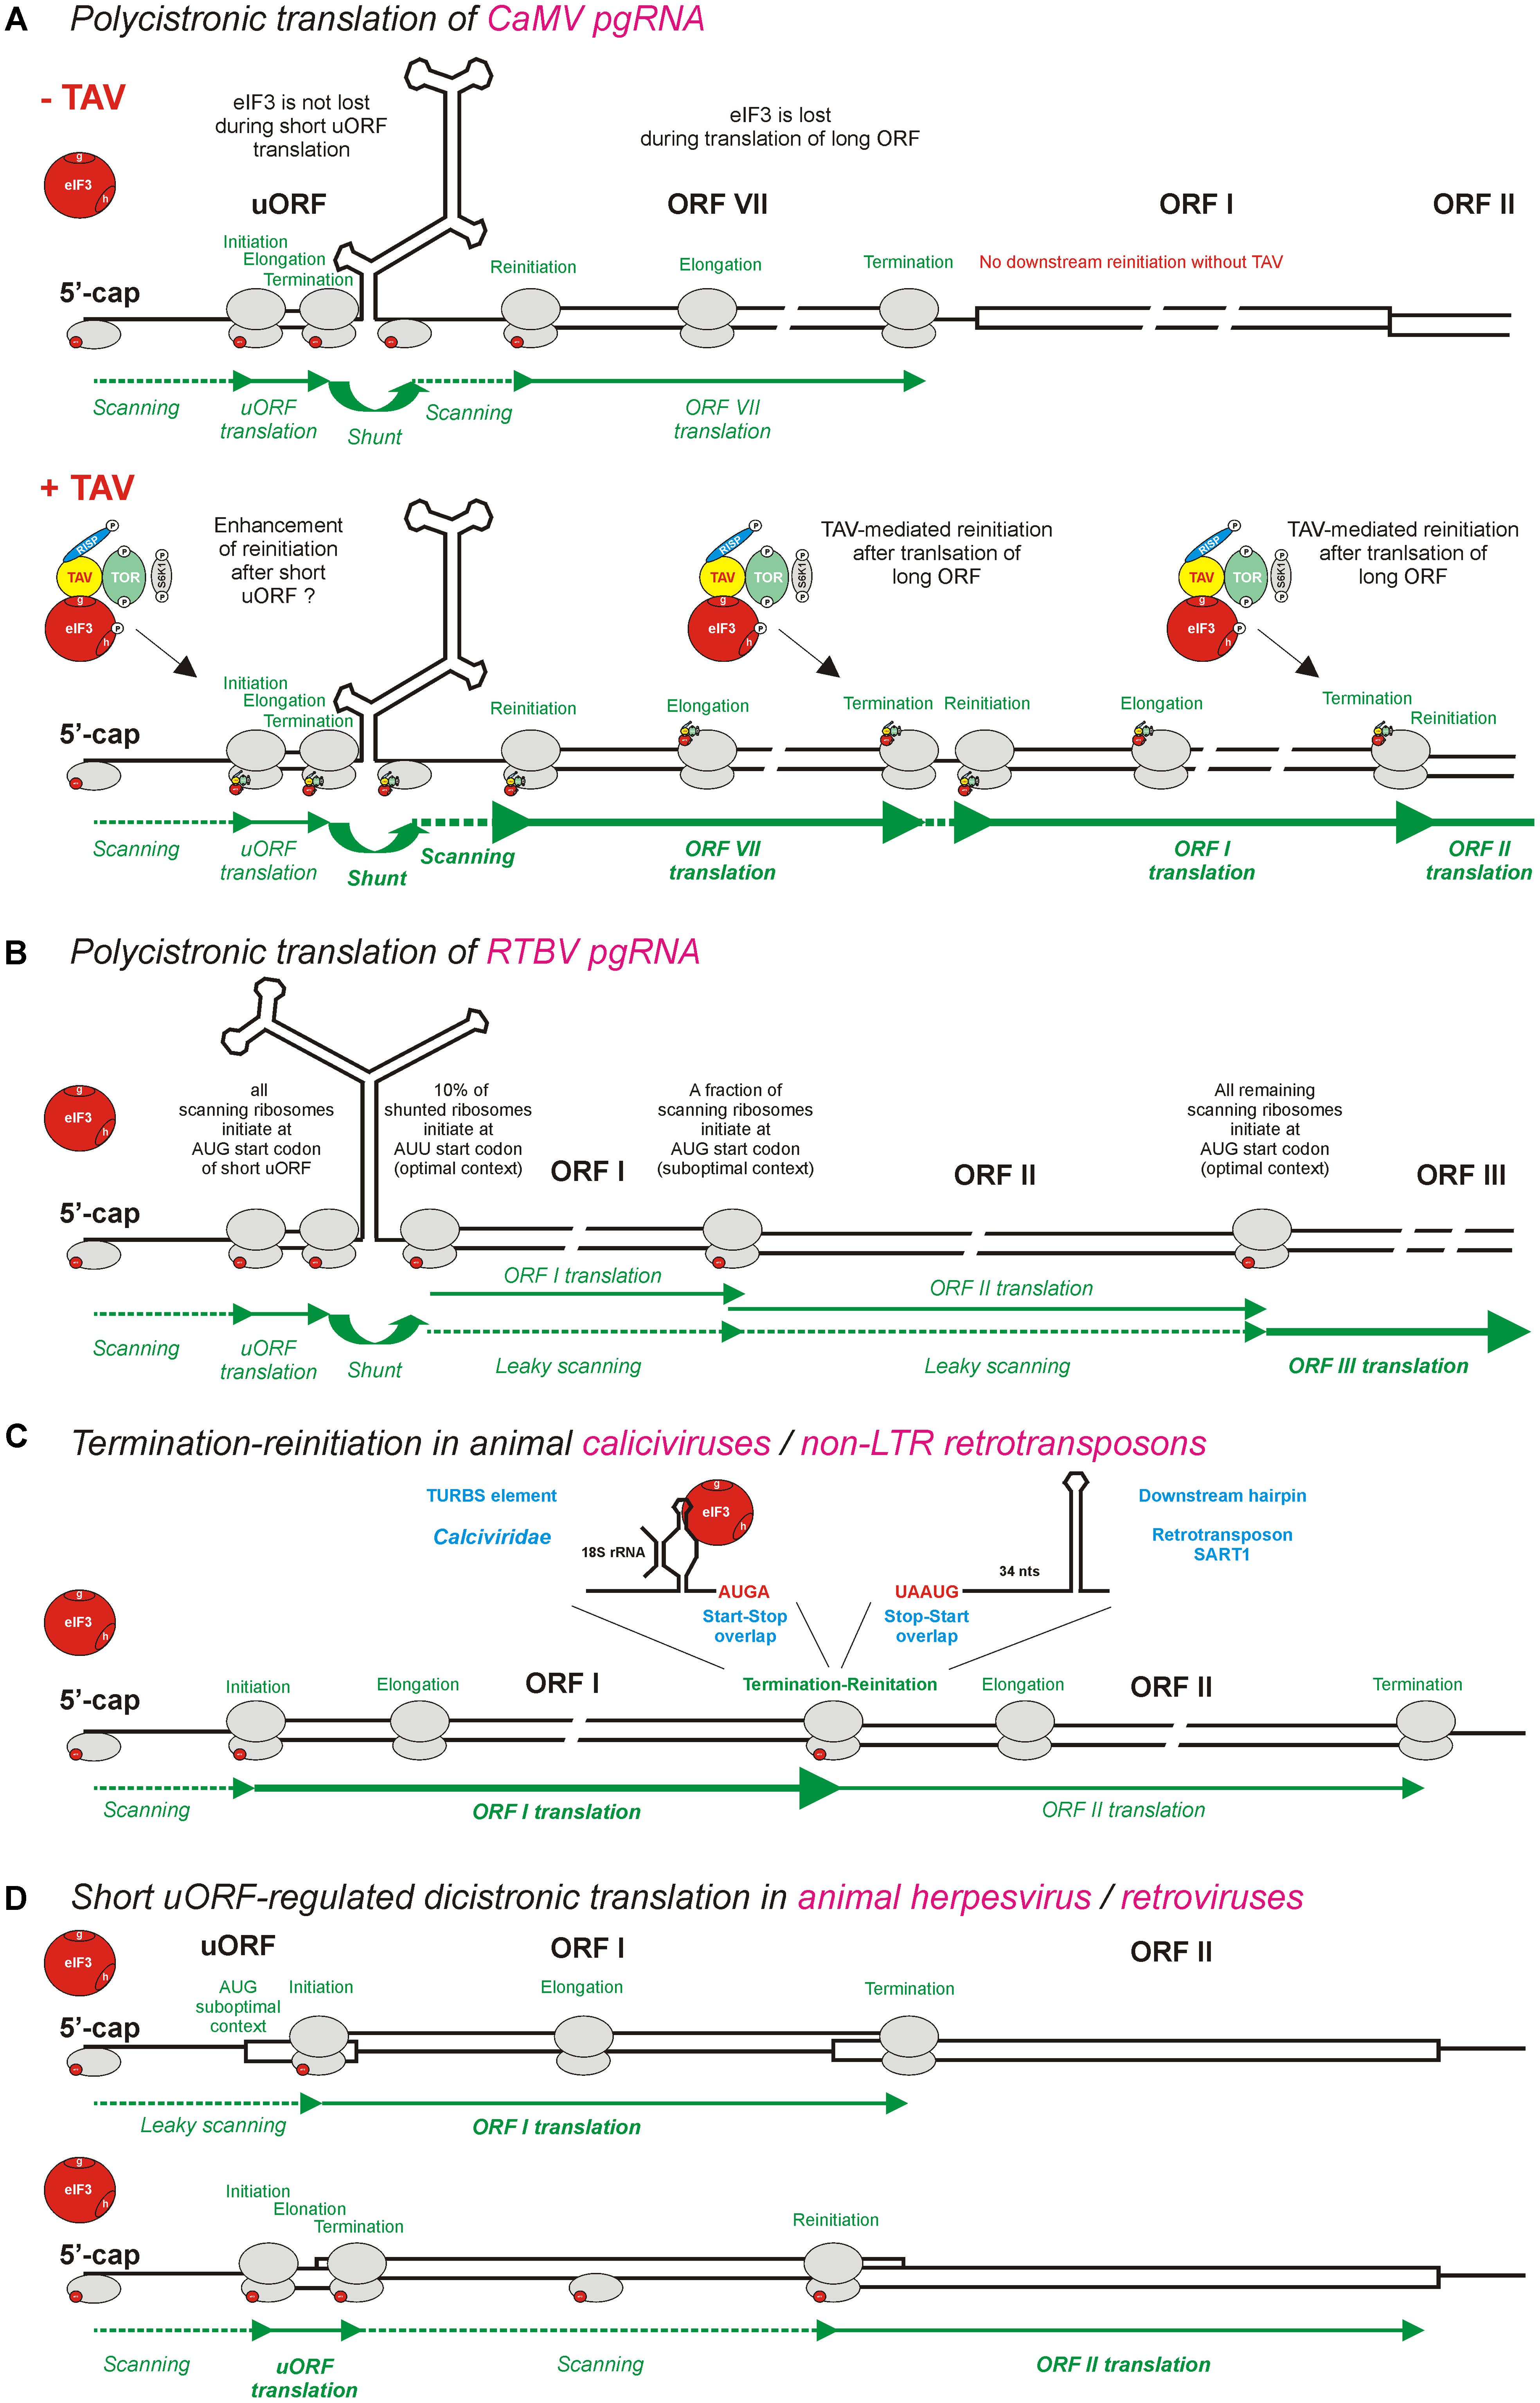 The SIV leader region can drive gene expression in a bicistronic RNA